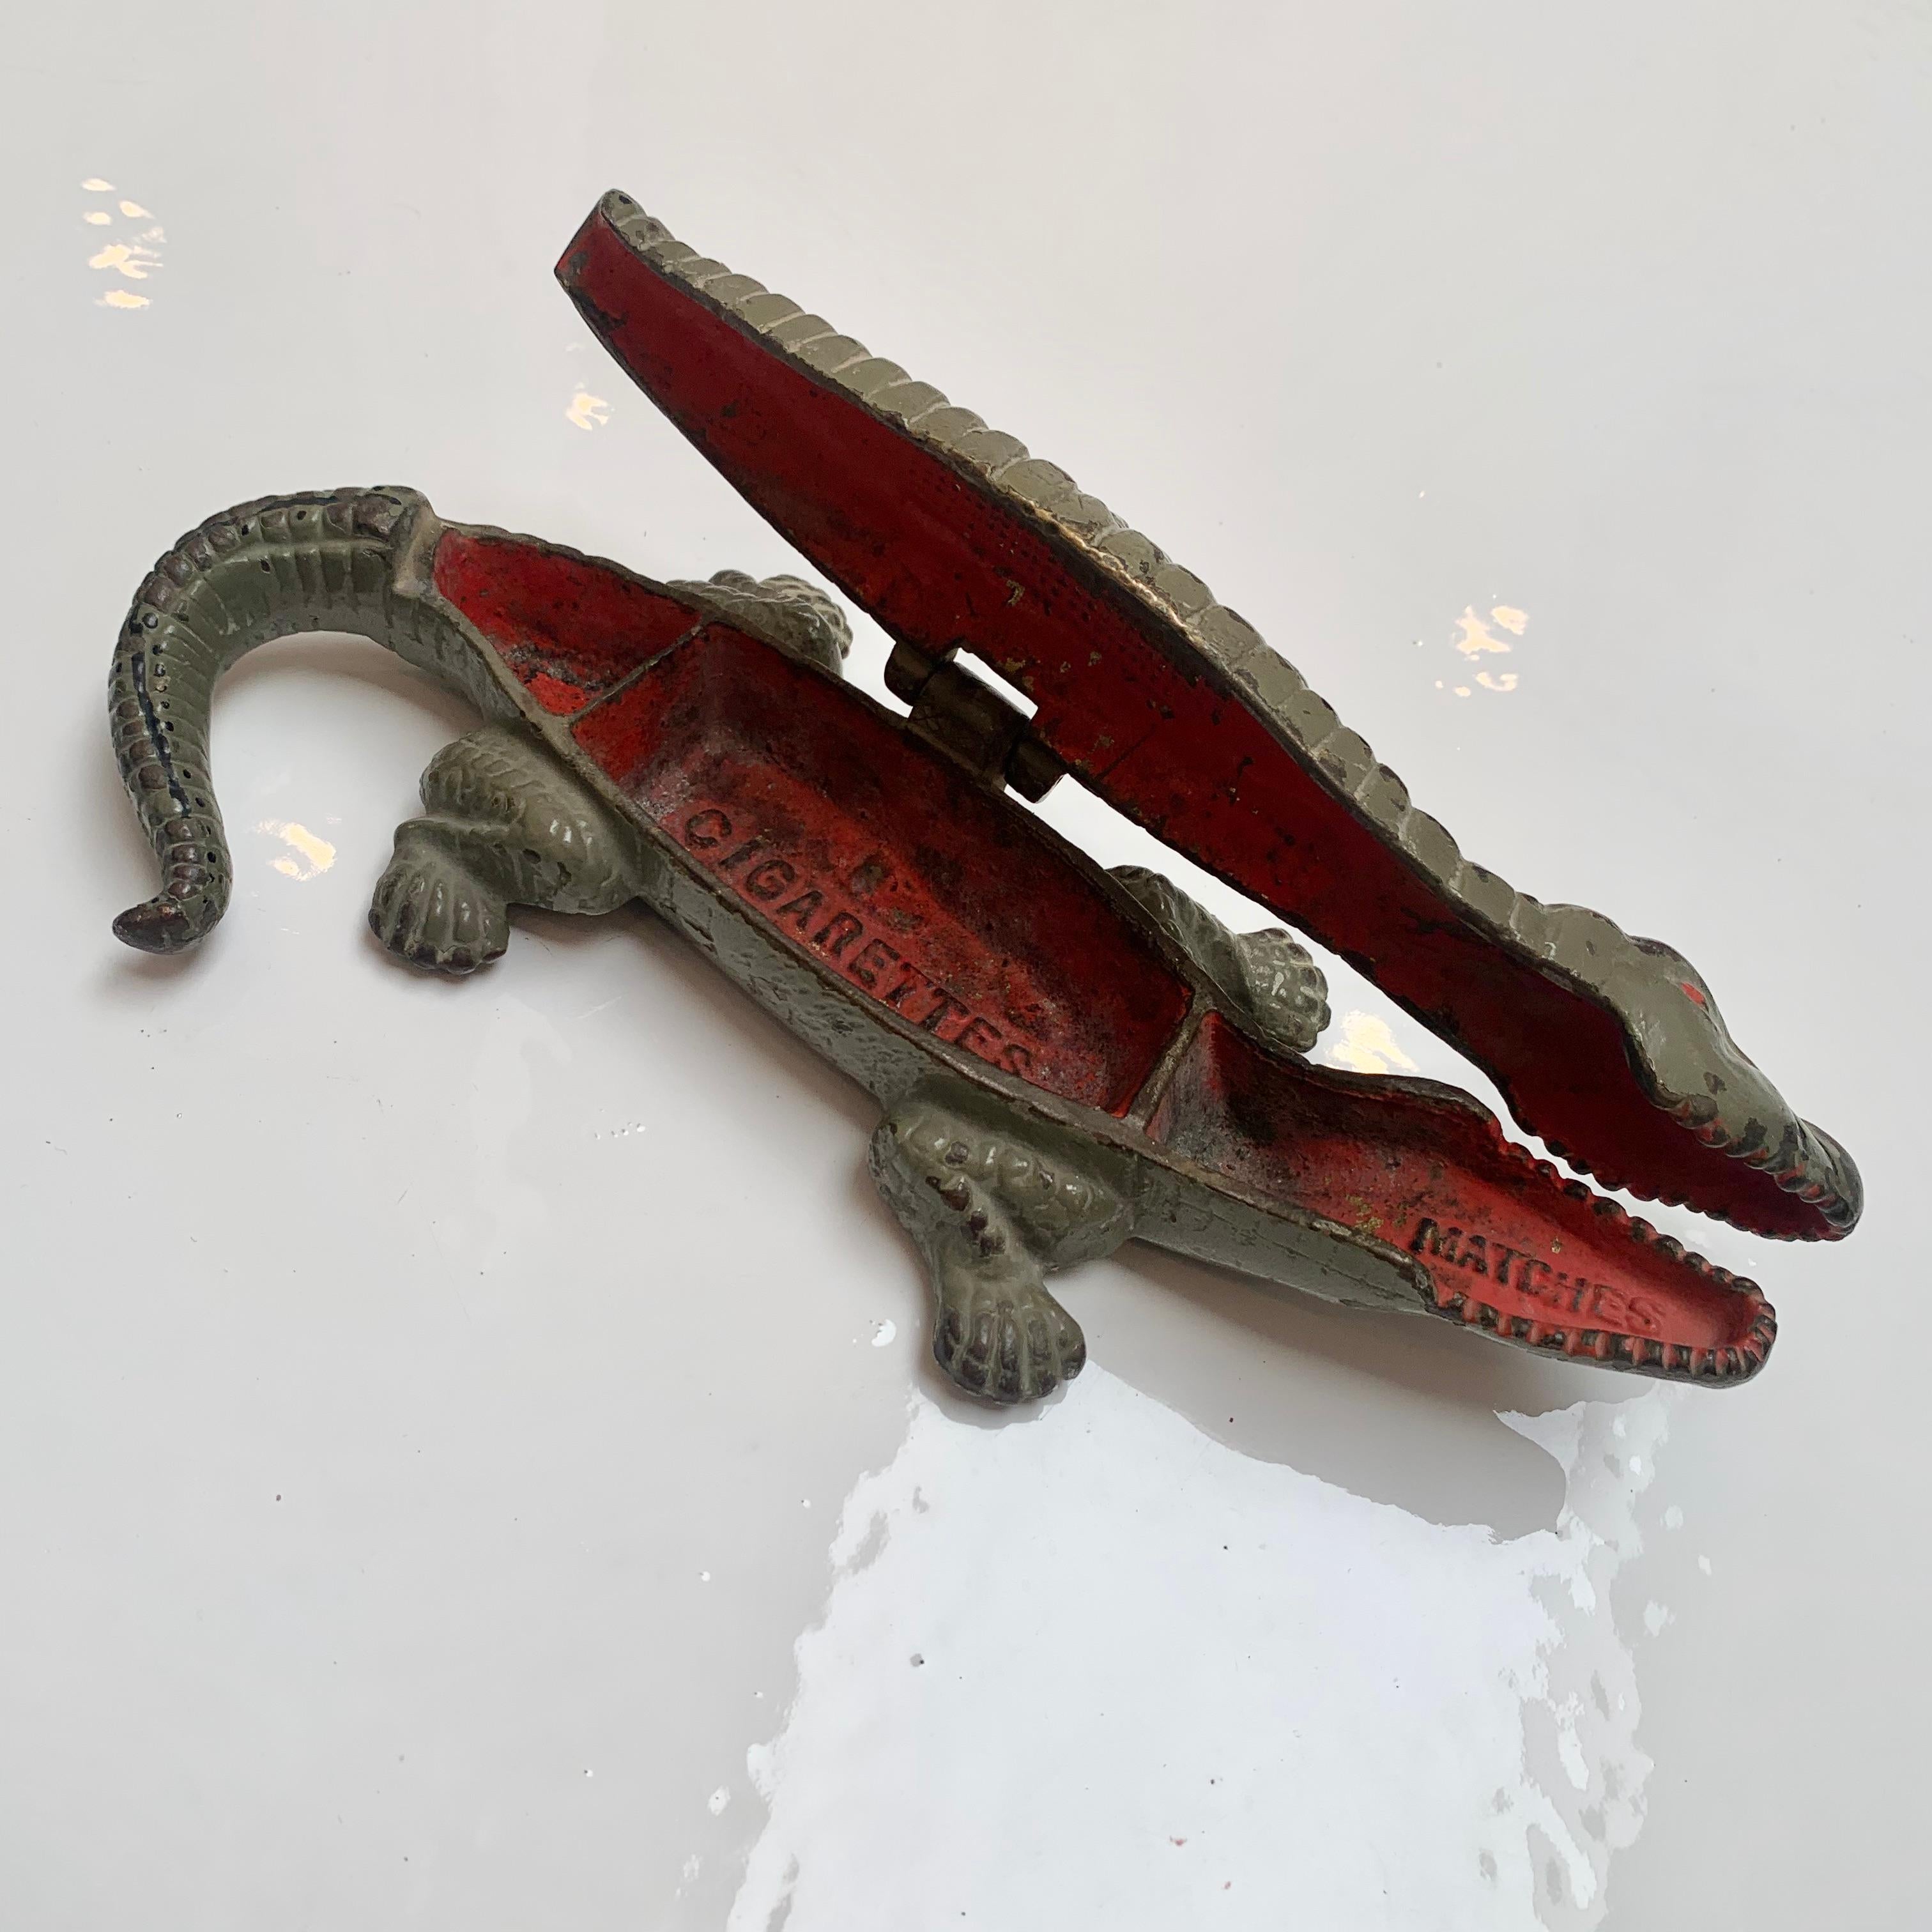 Great sculptural crocodile box. Originally made to hold rolled cigarettes and matches. Great ashtray or pillbox. Large-scale. Measure: 9.25